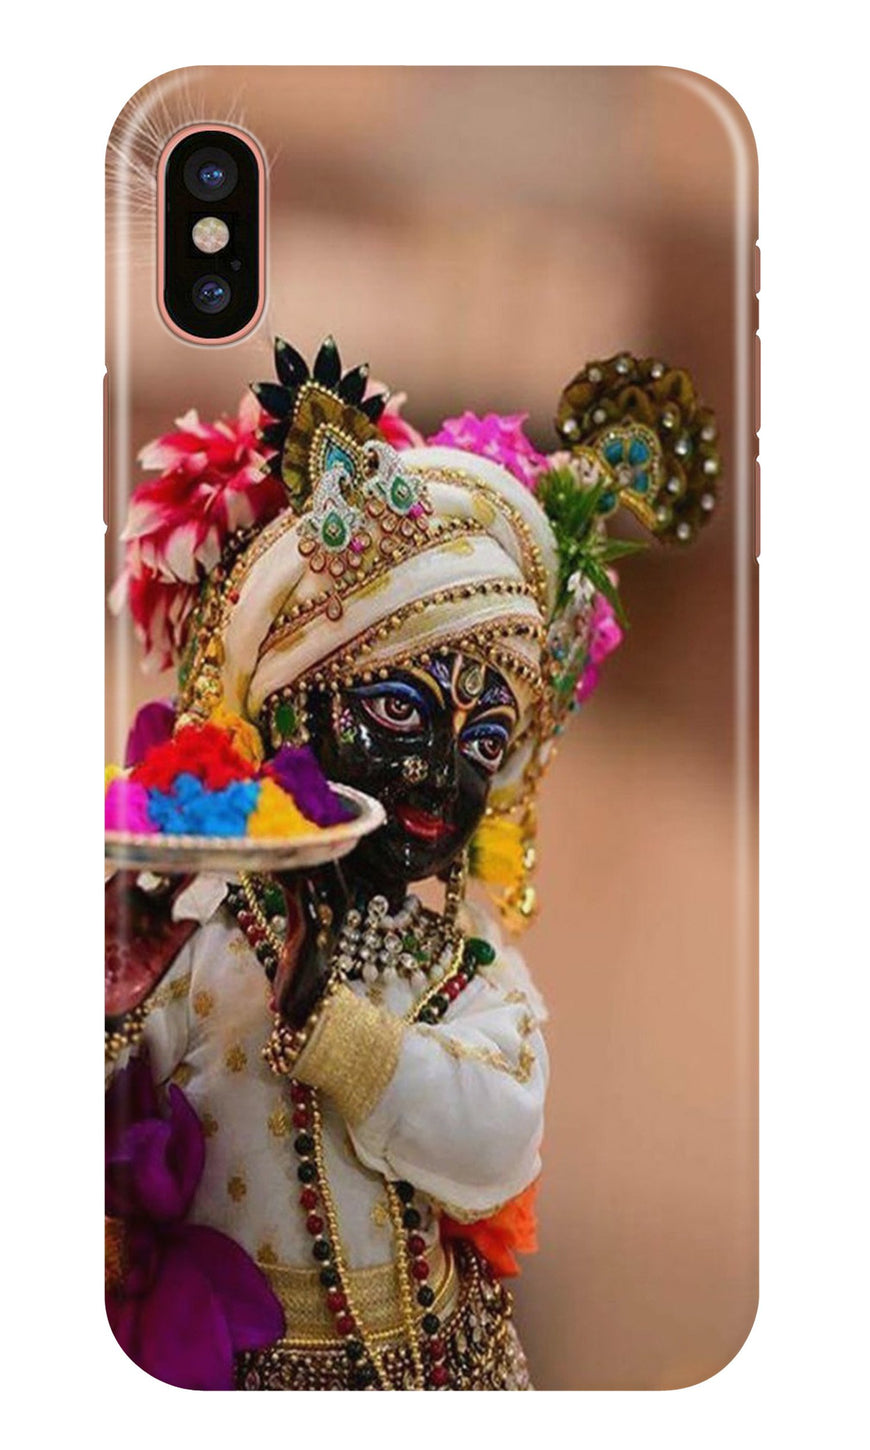 Lord Krishna2 Case for iPhone Xs